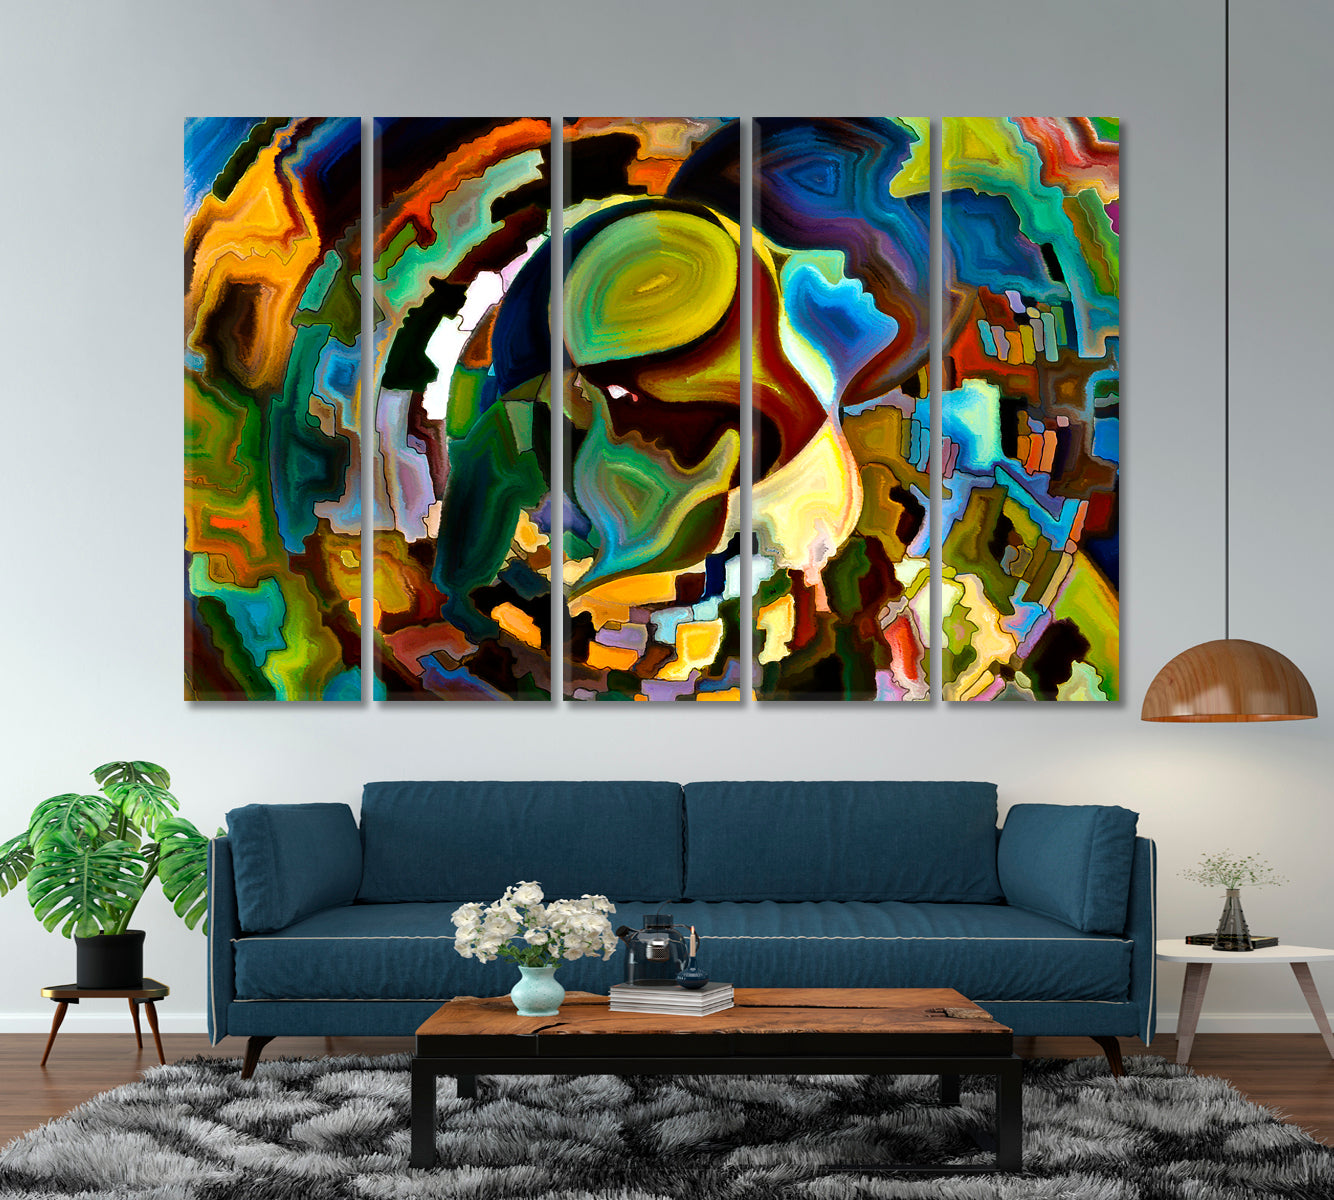 People And Shapes Colorful Abstraction Abstract Art Print Artesty 5 panels 36" x 24" 